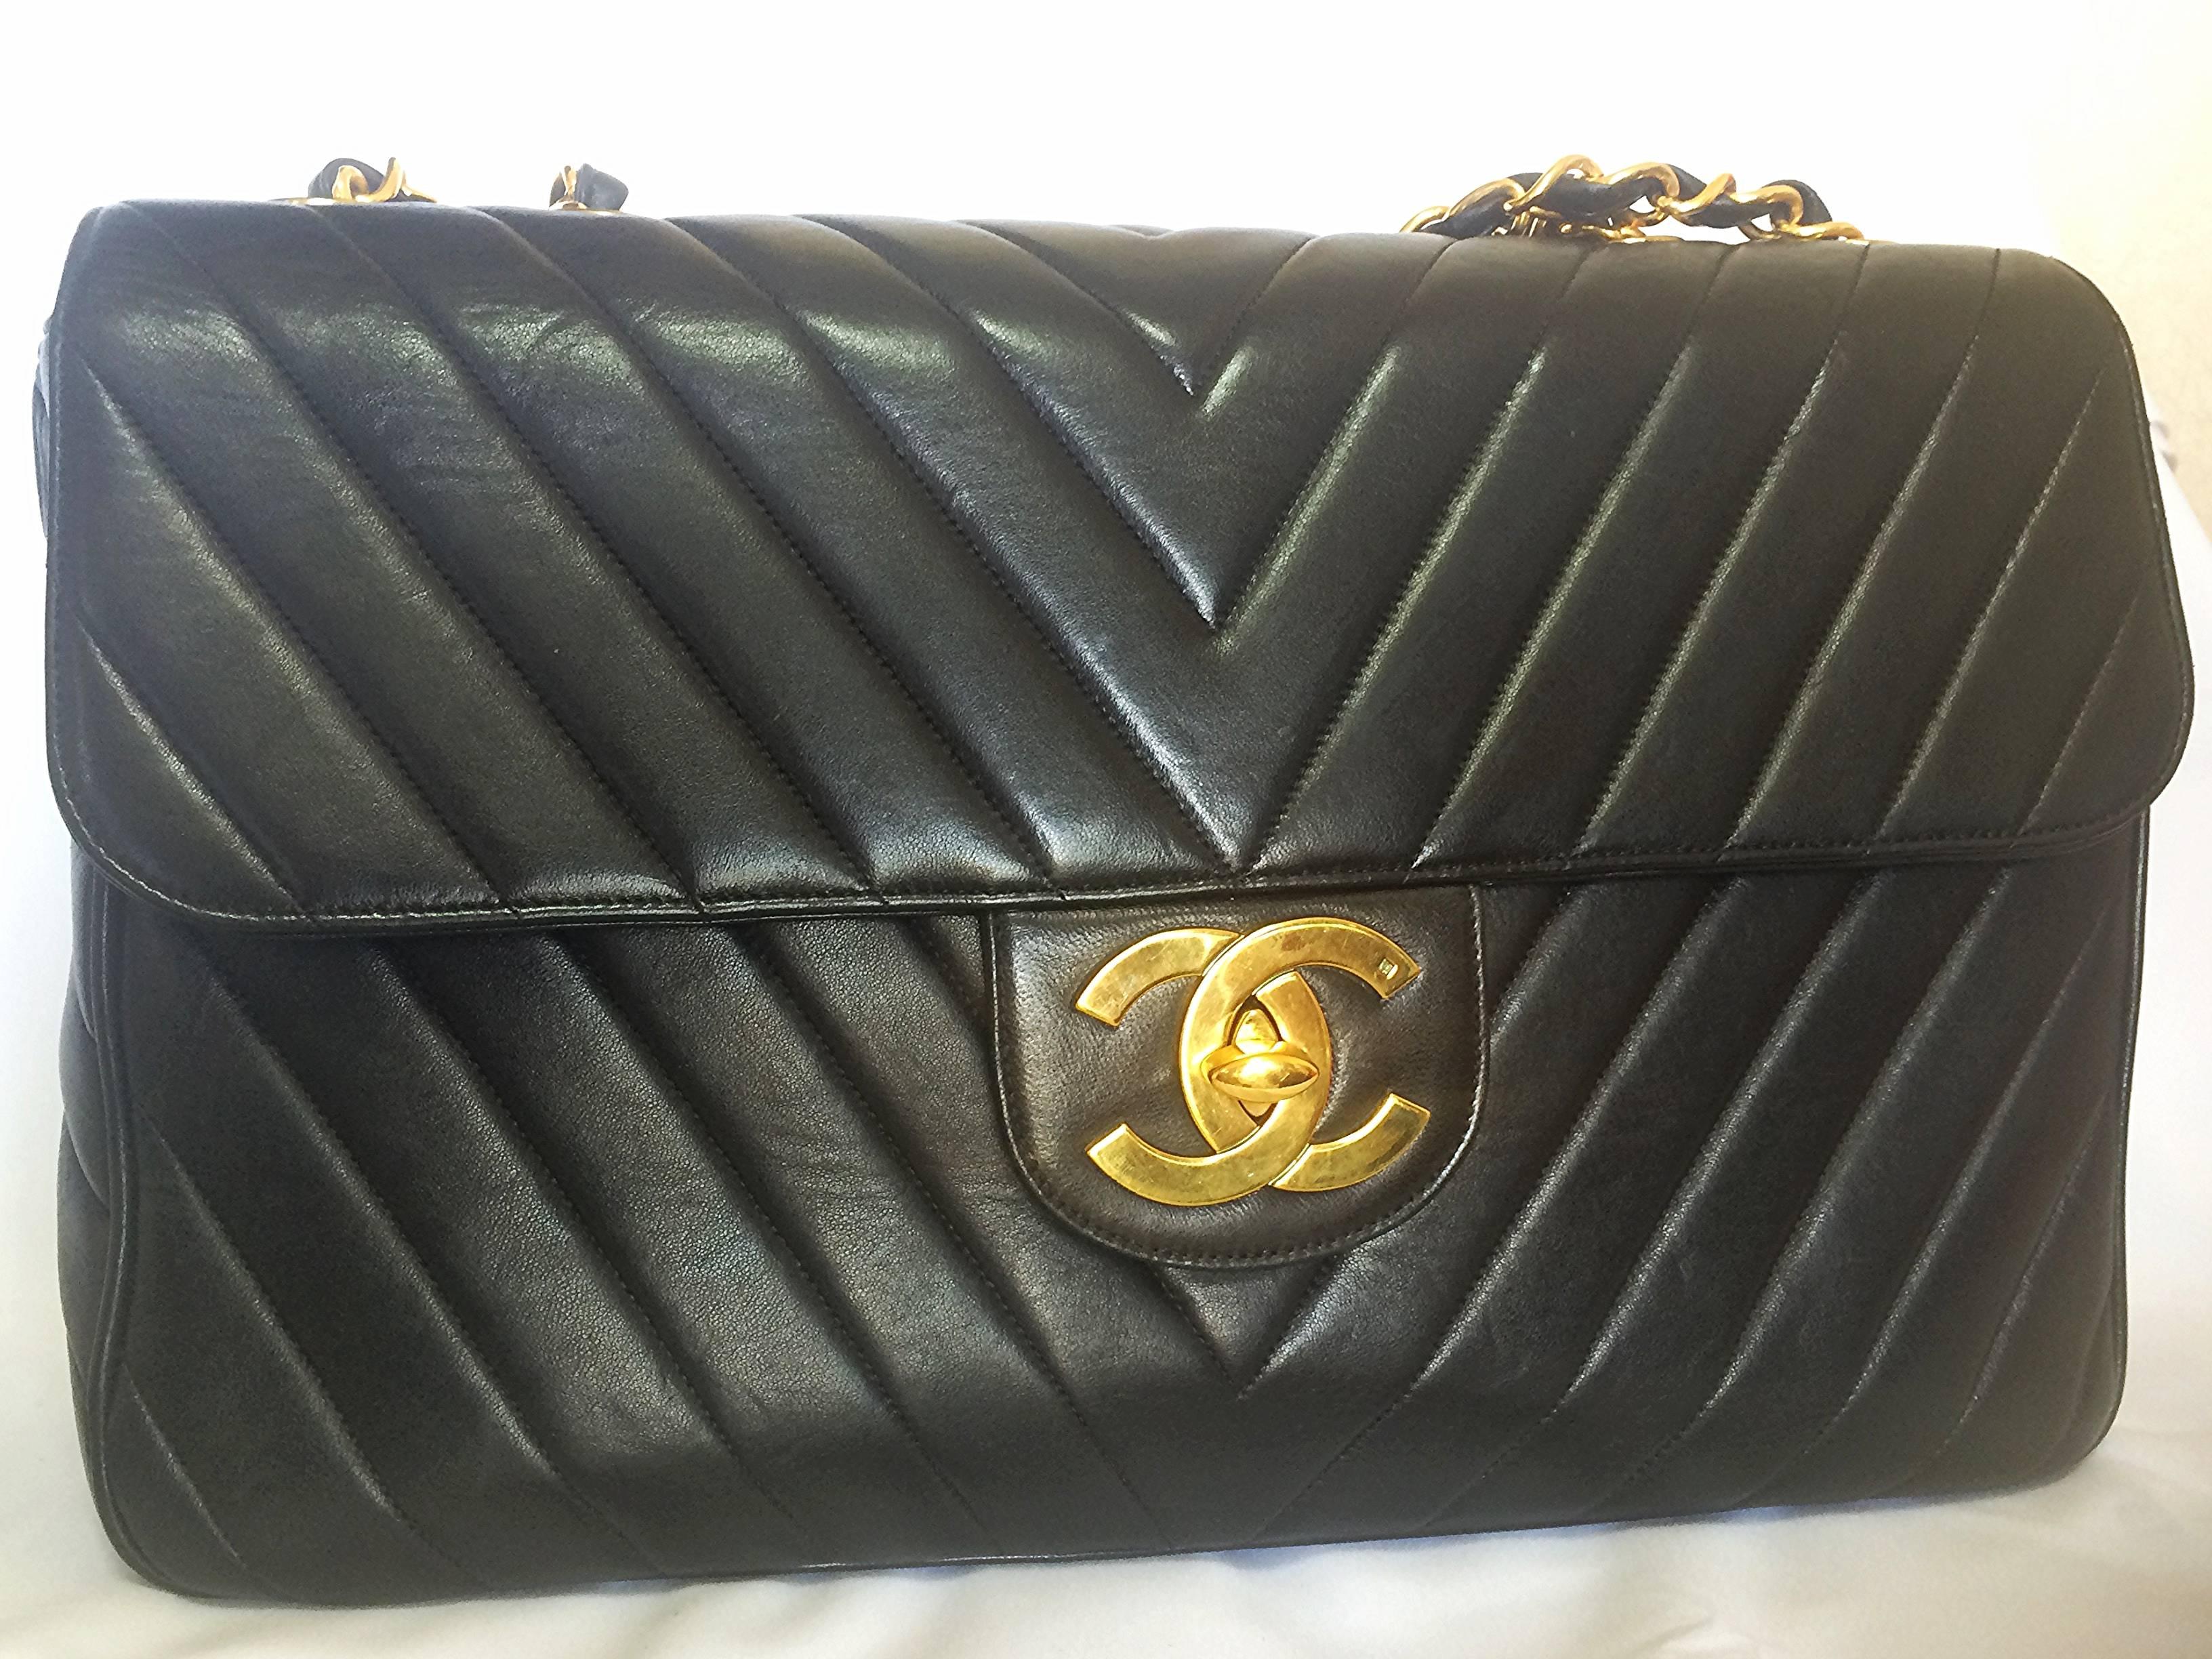 1990s. Vintage CHANEL classic flap jumbo/extra large 2.55 chain shoulder bag with chevron stitch. Black lambskin with V stitch design.

Rare masterpiece from CHANEL back in the 90's....
Jumbo/ extra large black lambskin shoulder bag in Chevron